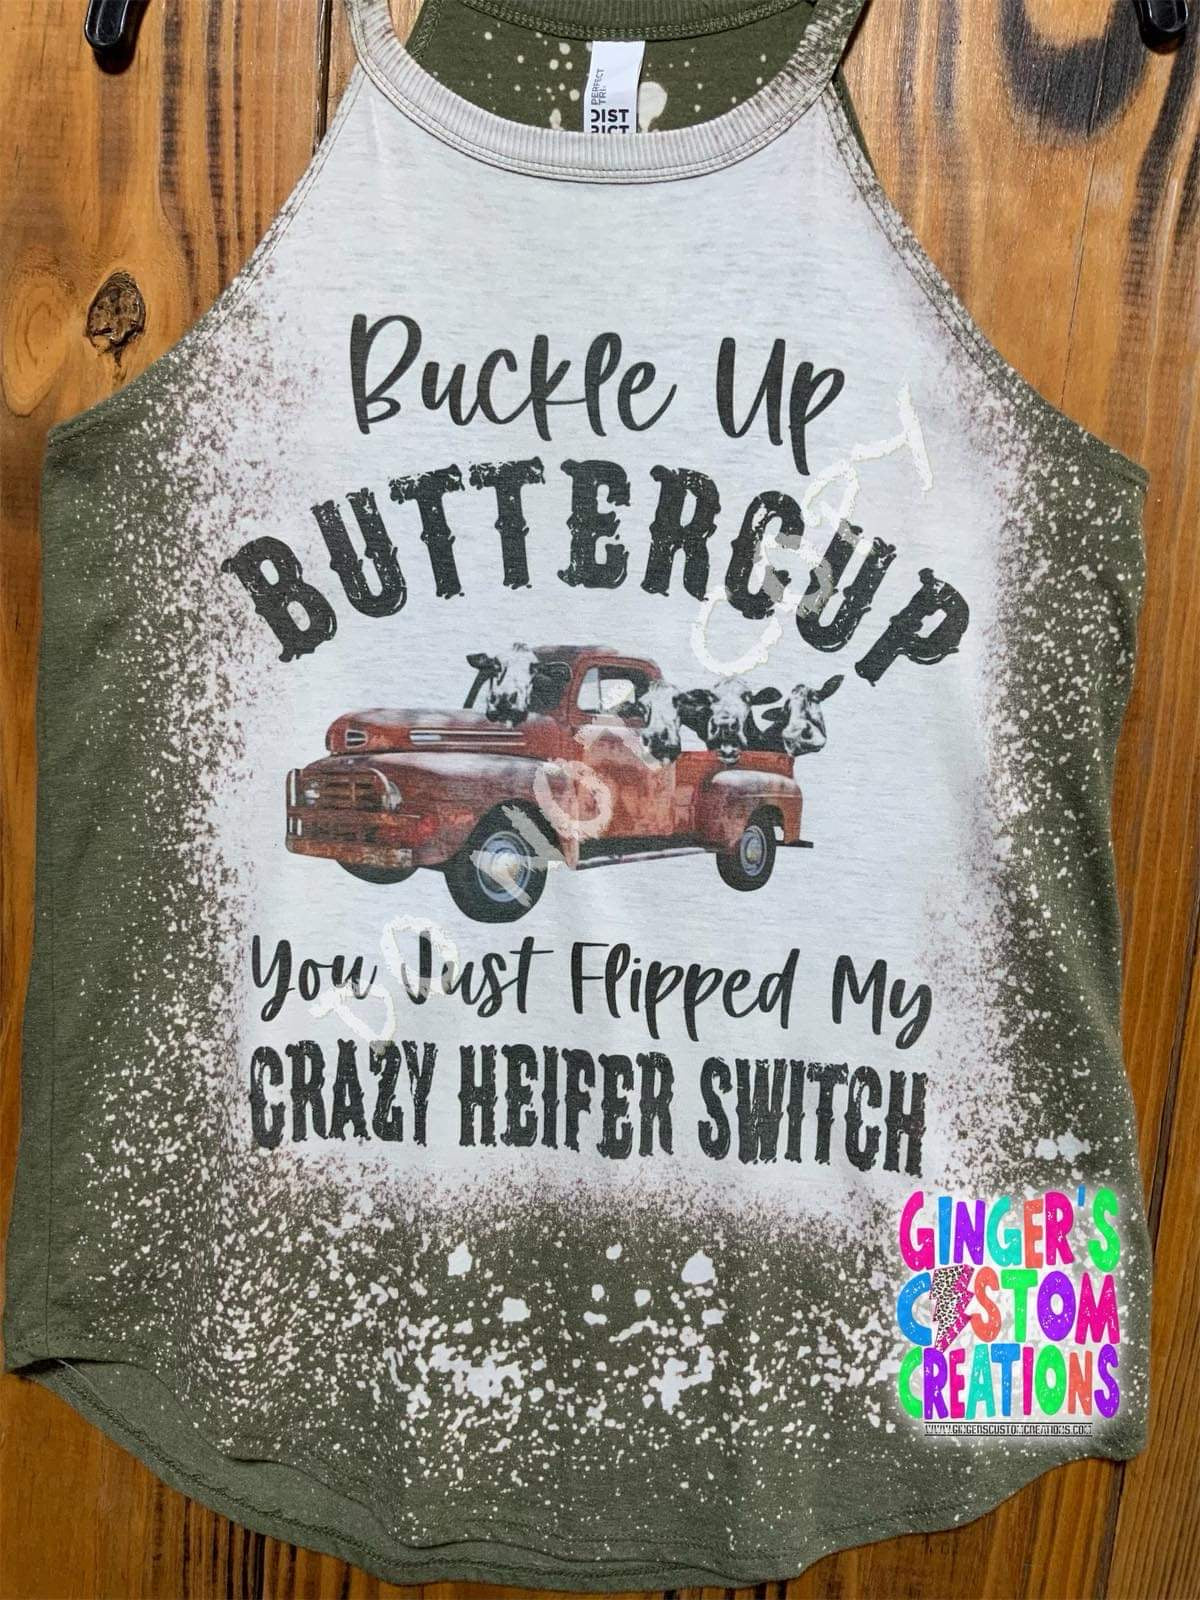 Buckle up buttercup TANK TOP